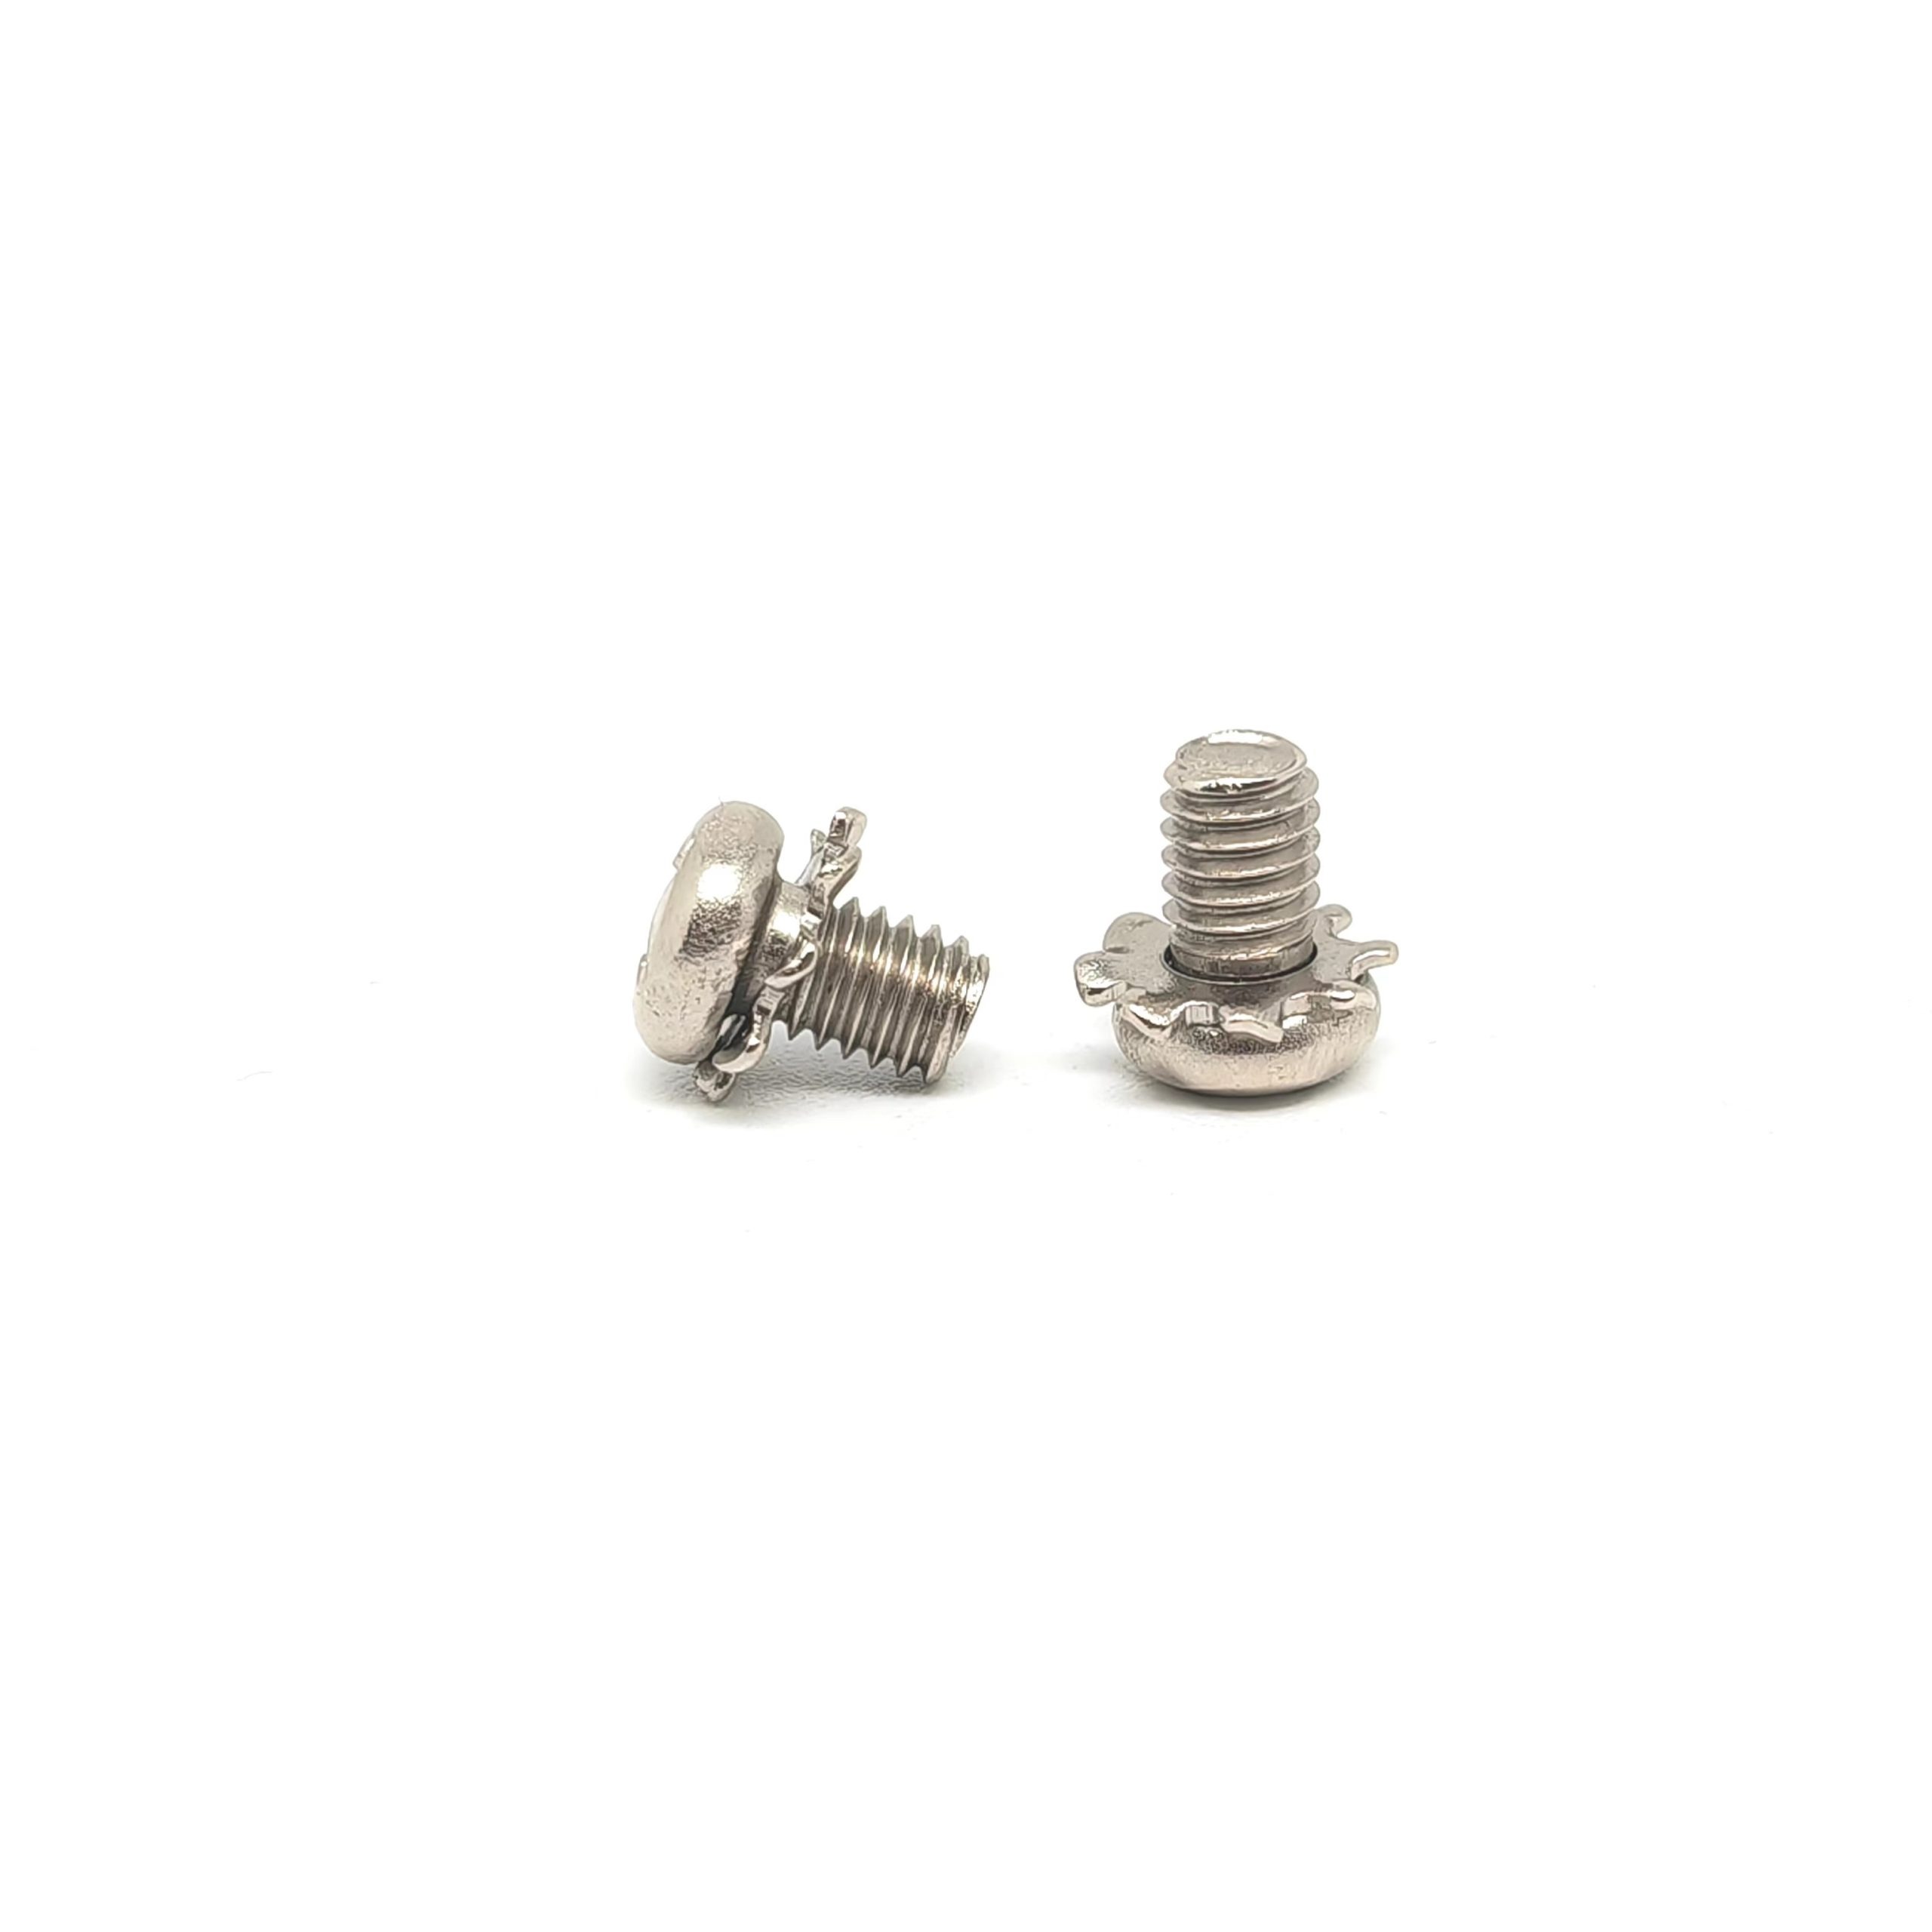 Pan Head Screw with Jagged Washer Supplier